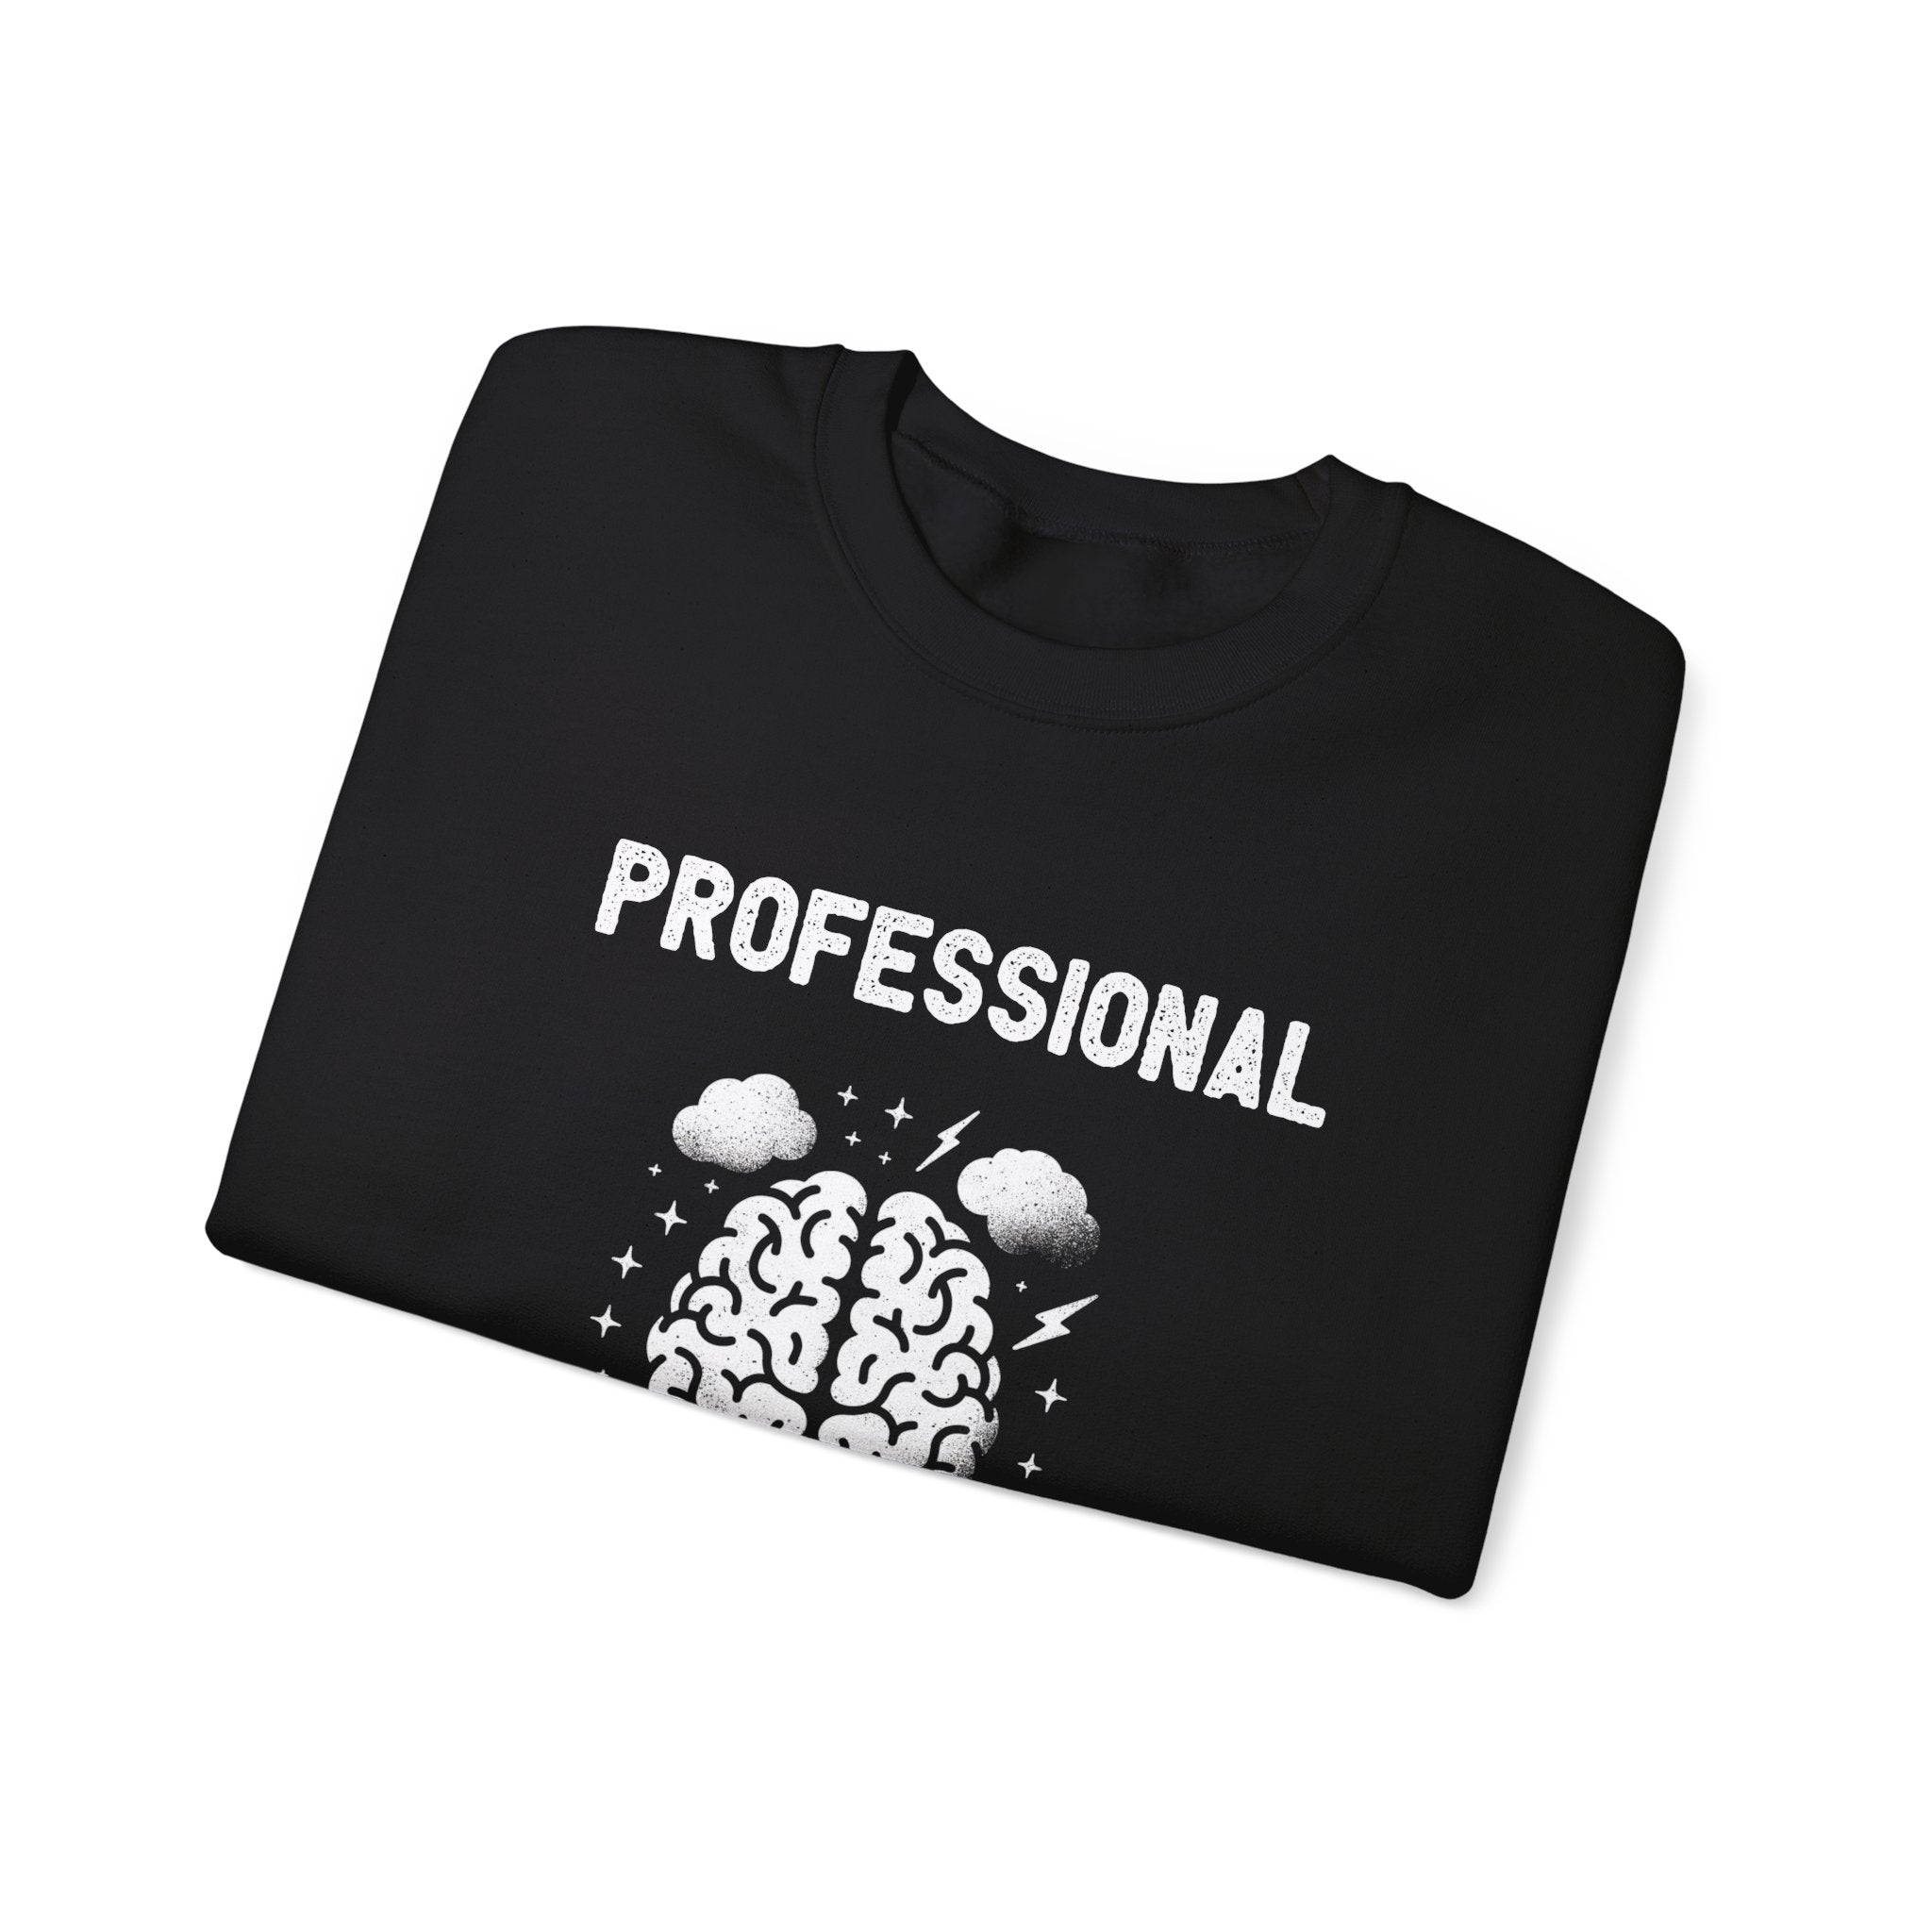 Folded black Professional Overthinker - Sweatshirt displaying the word "PROFESSIONAL" above an illustration of a brain, clouds, and lightning bolts – perfect for those cold months.